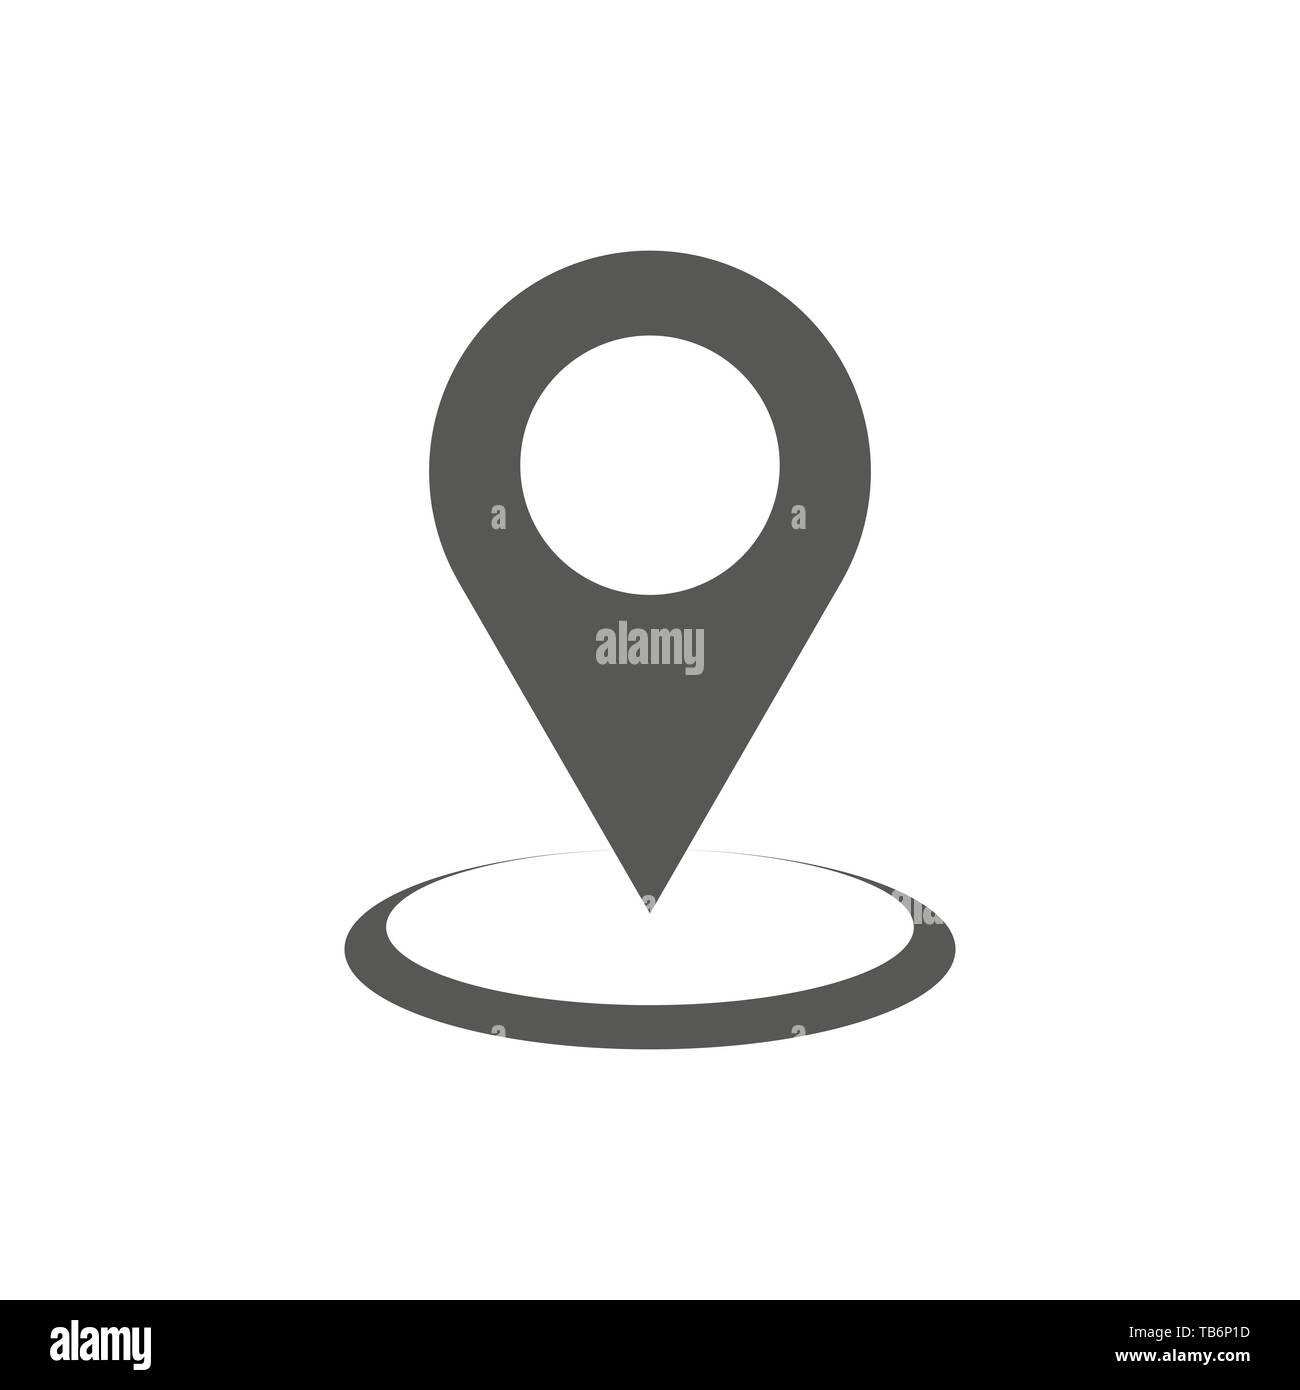 Maps pin. Location pin. Location map icon. Pin icon vector isolated on ...